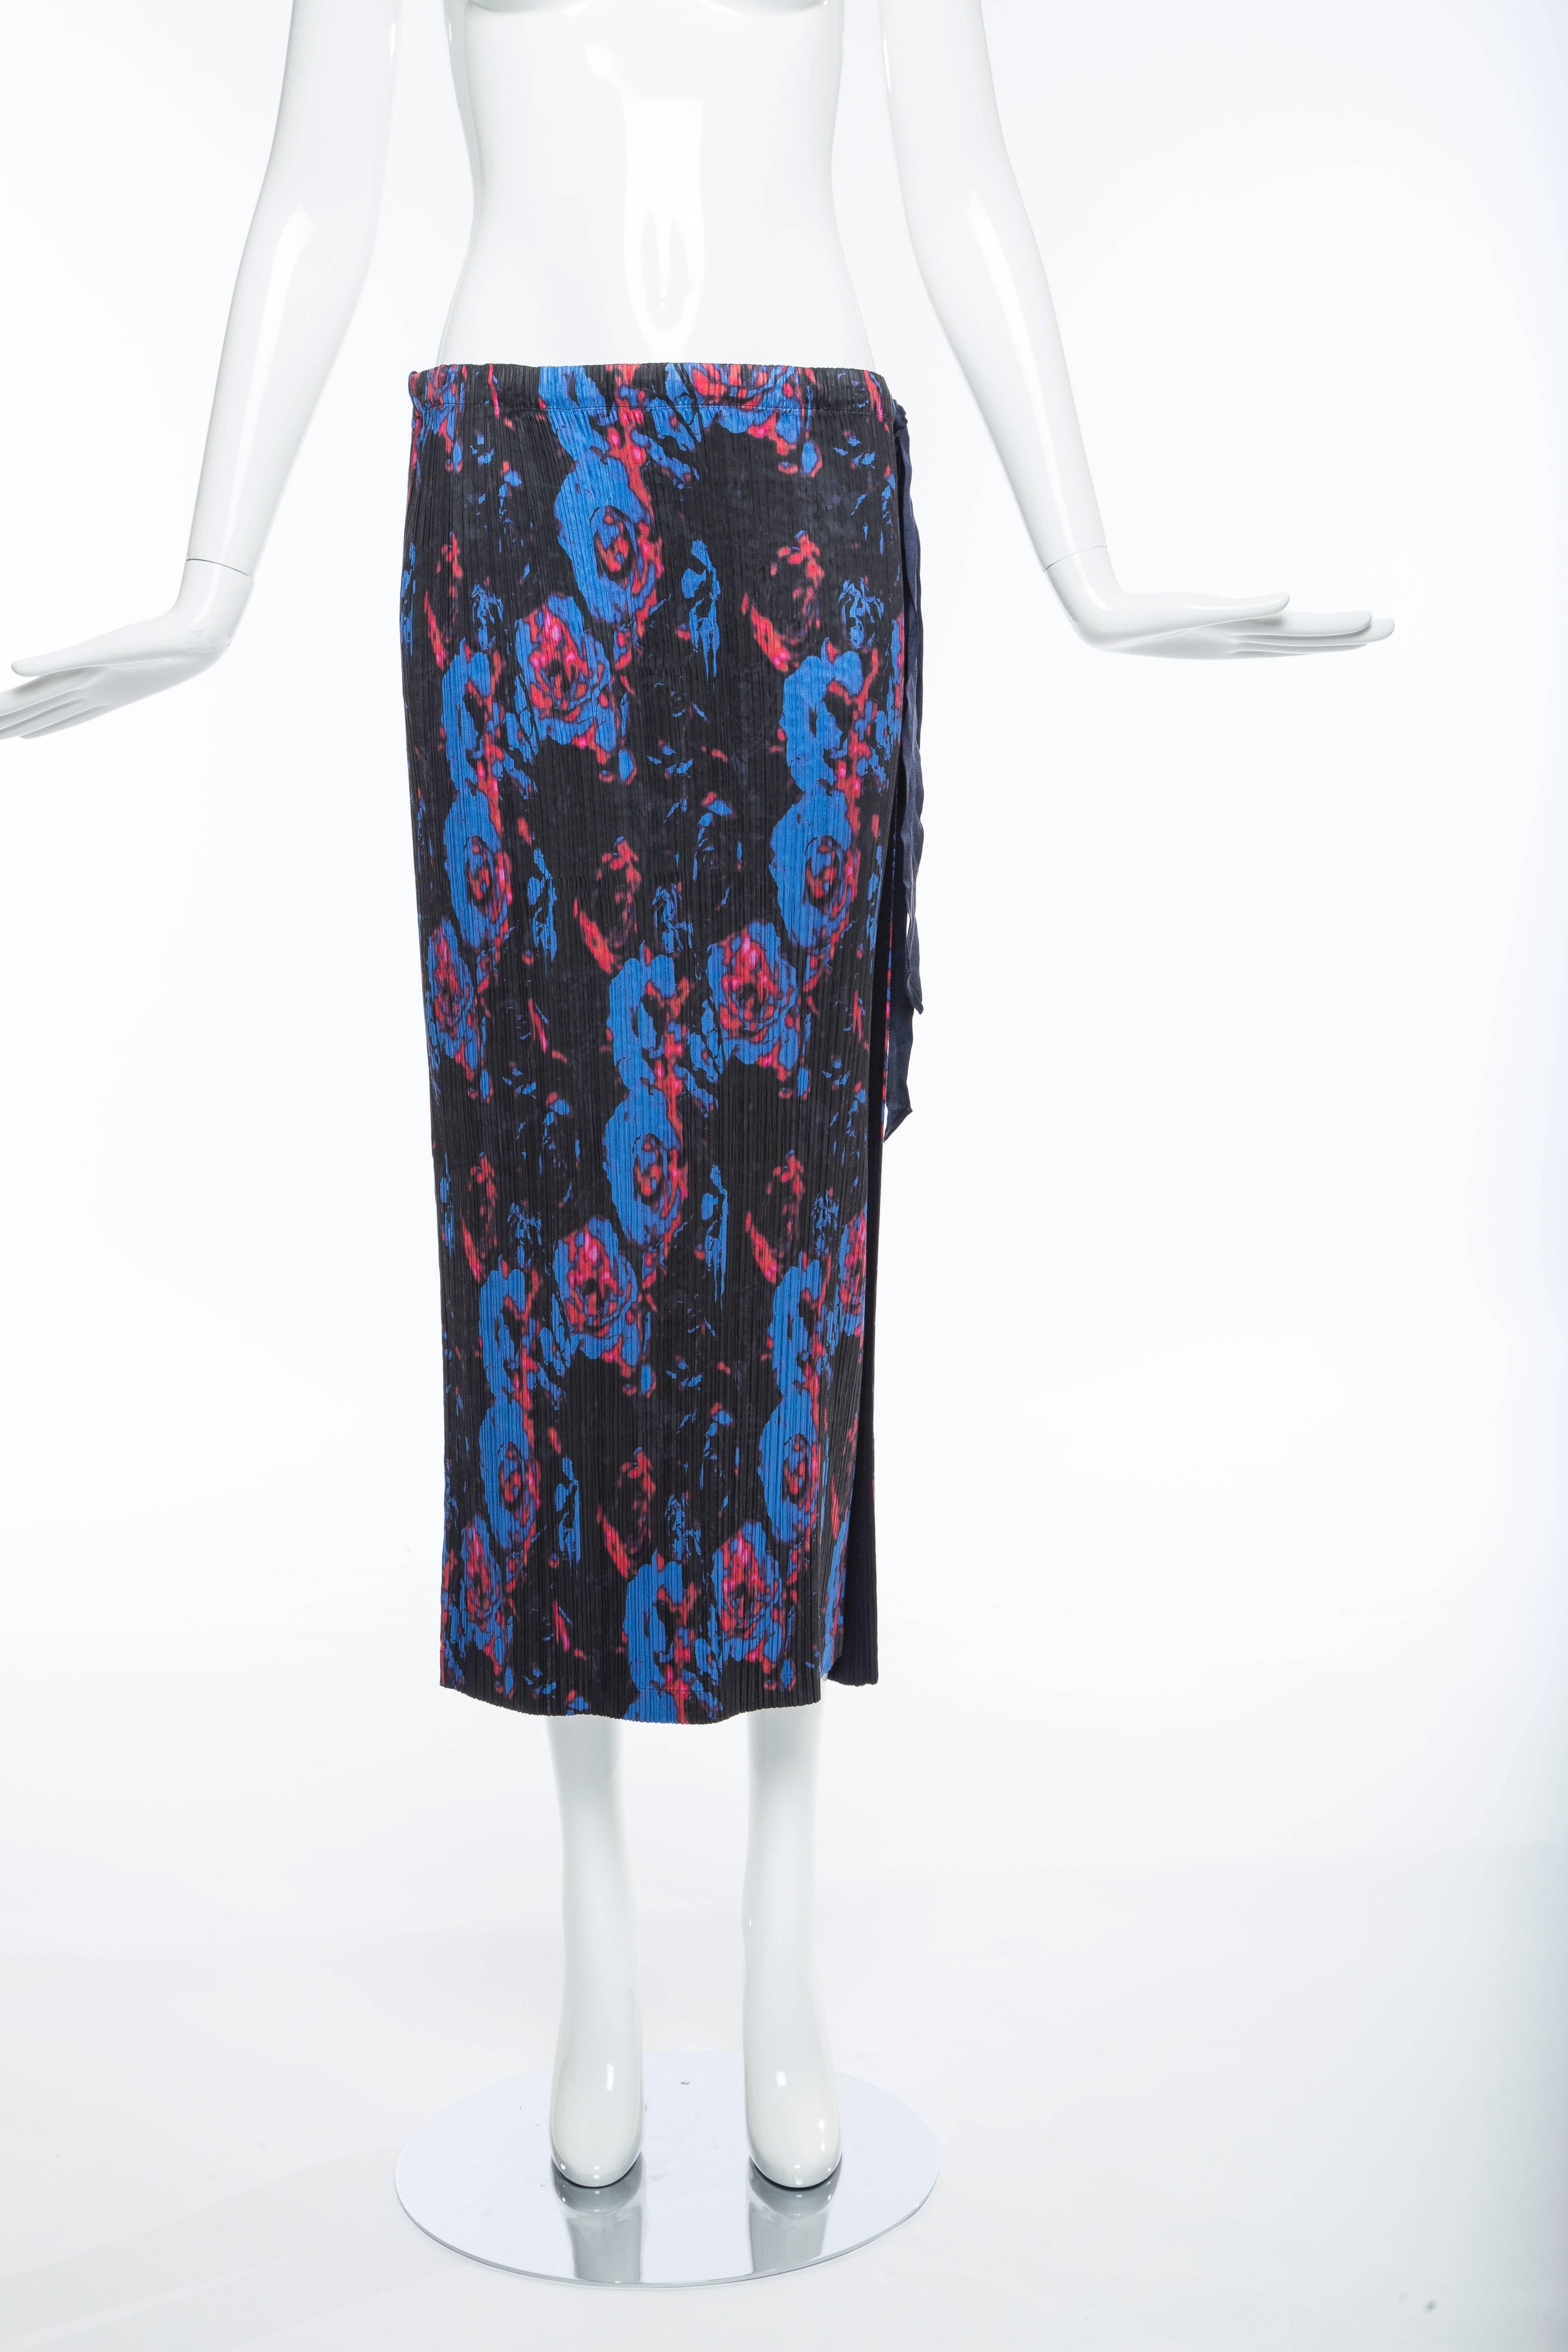 Issey Miyake, Spring 2007, navy blue printed reversible double layered silk polyester pleated skirt.

Japan Size 2